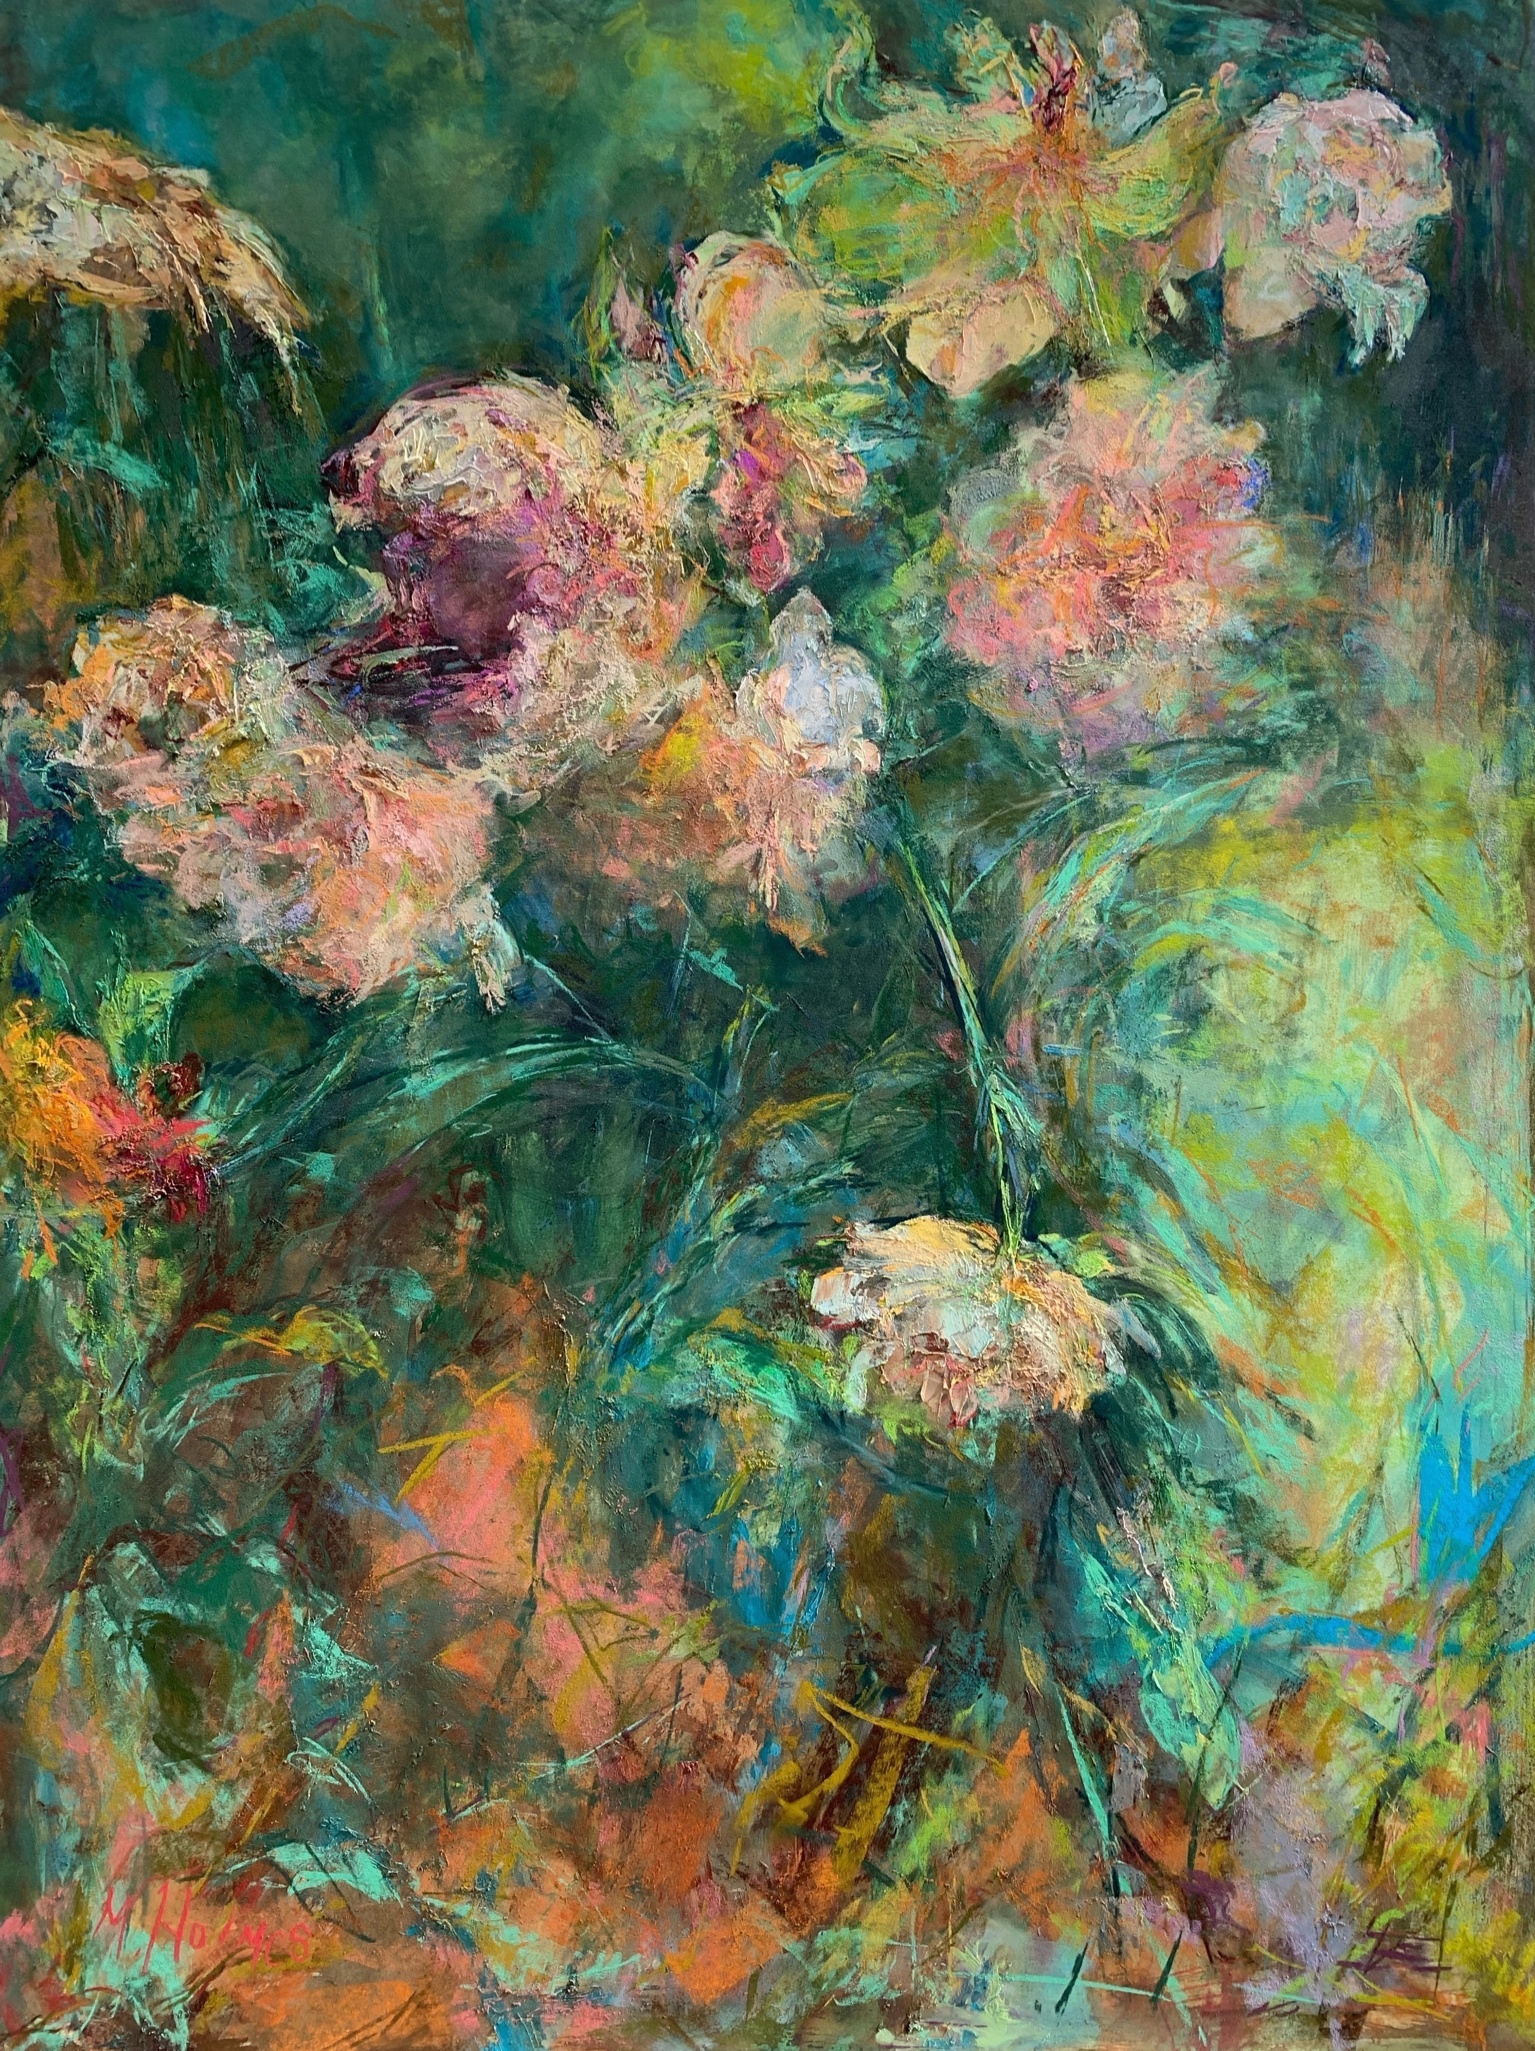 Marcia Holmes, "Garden Fascination," pastel and oil, 40 x 30 in. Private Collection